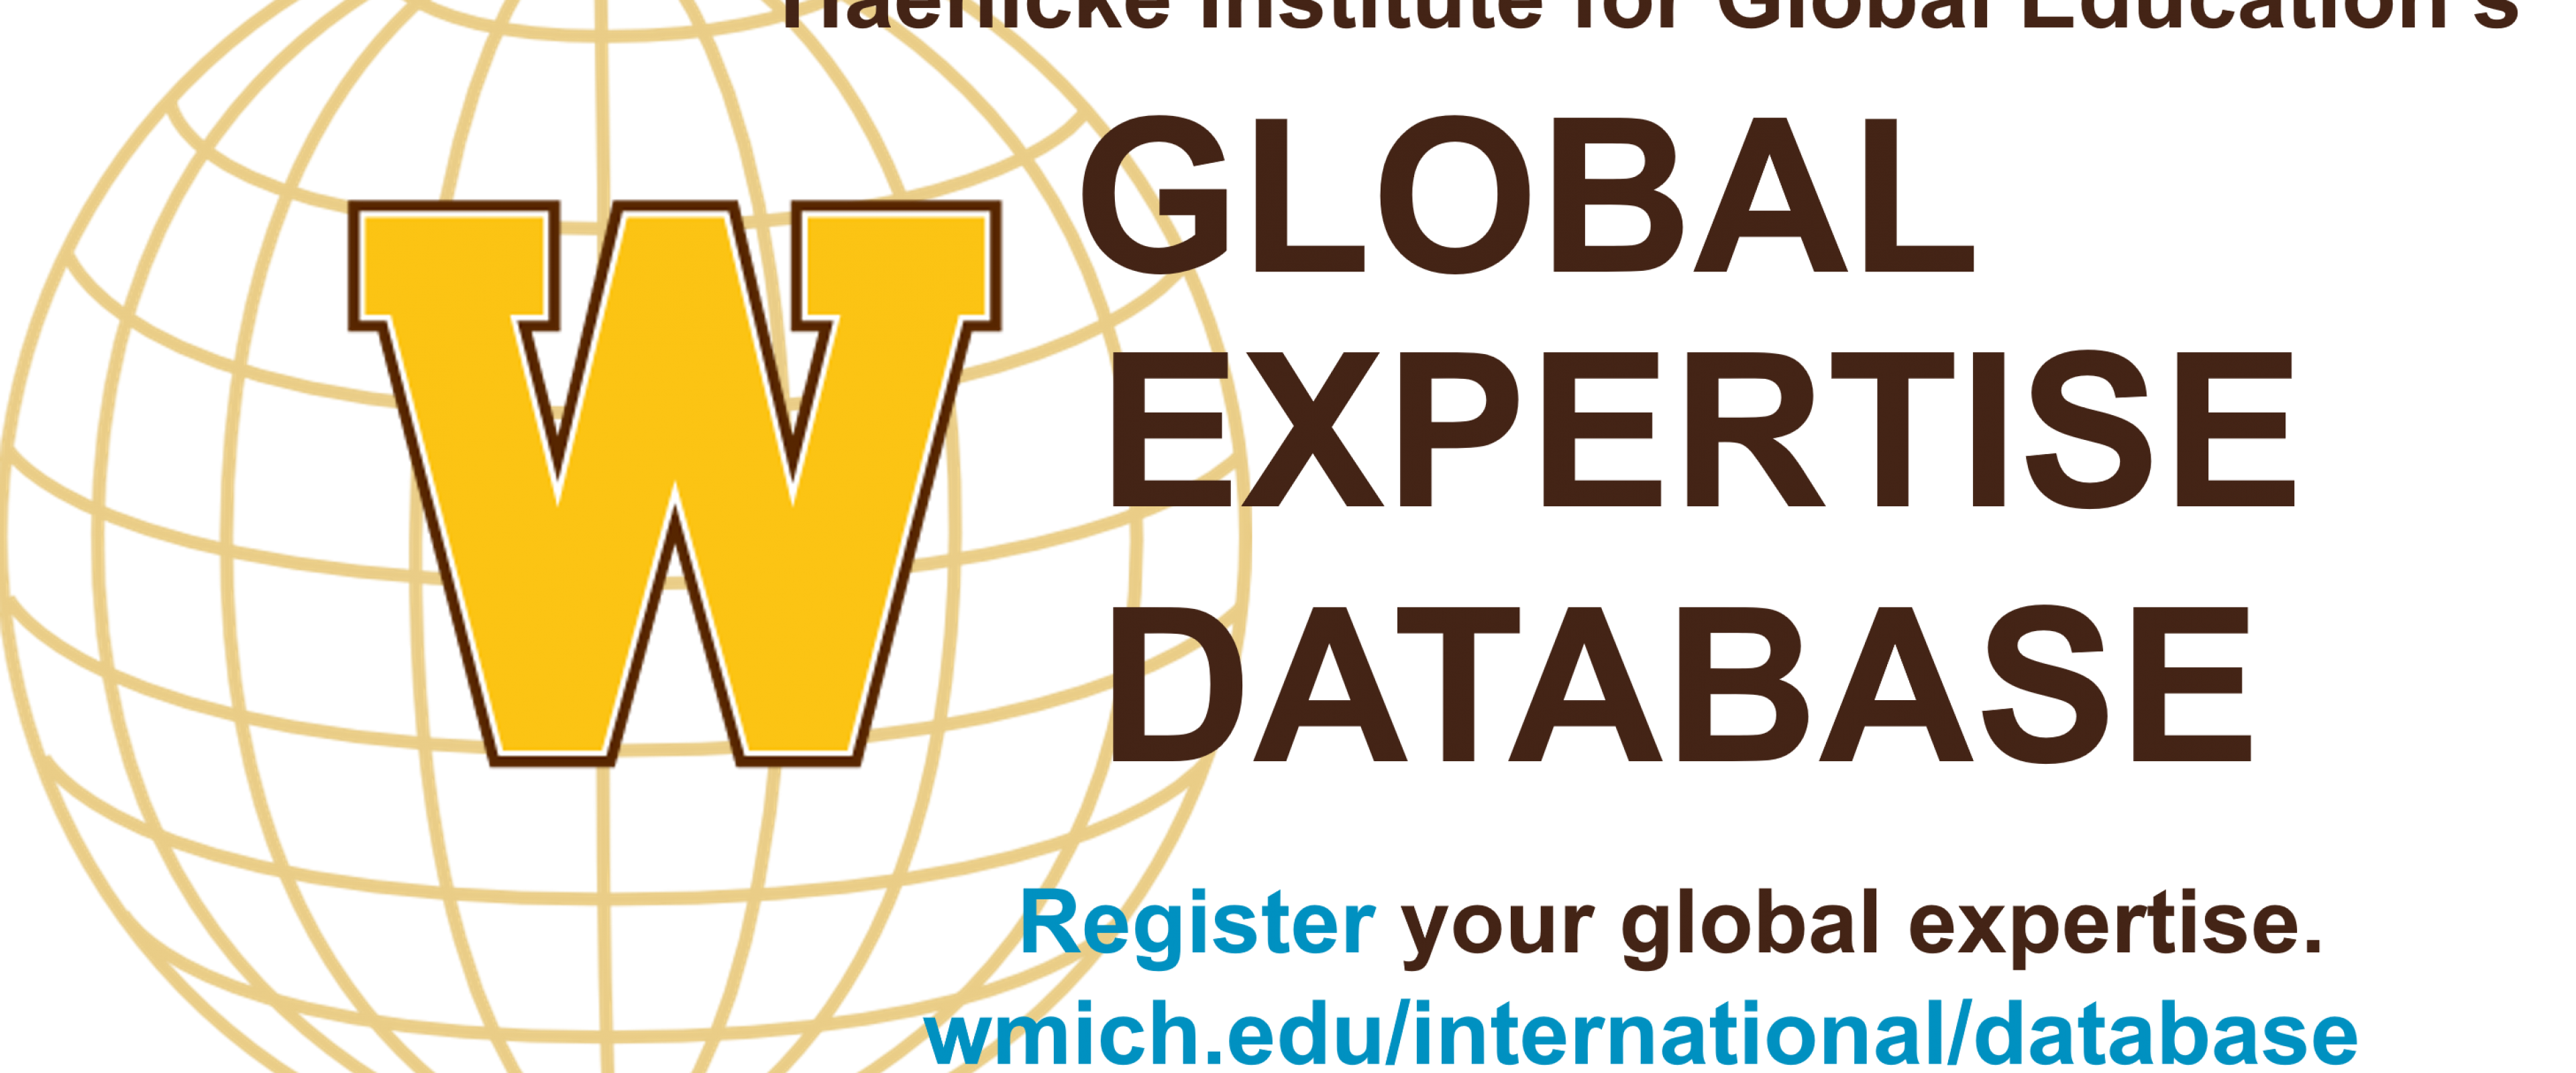 Decorative: Globe with text "Haenicke Institute for Global Education's Global Expertise Database"